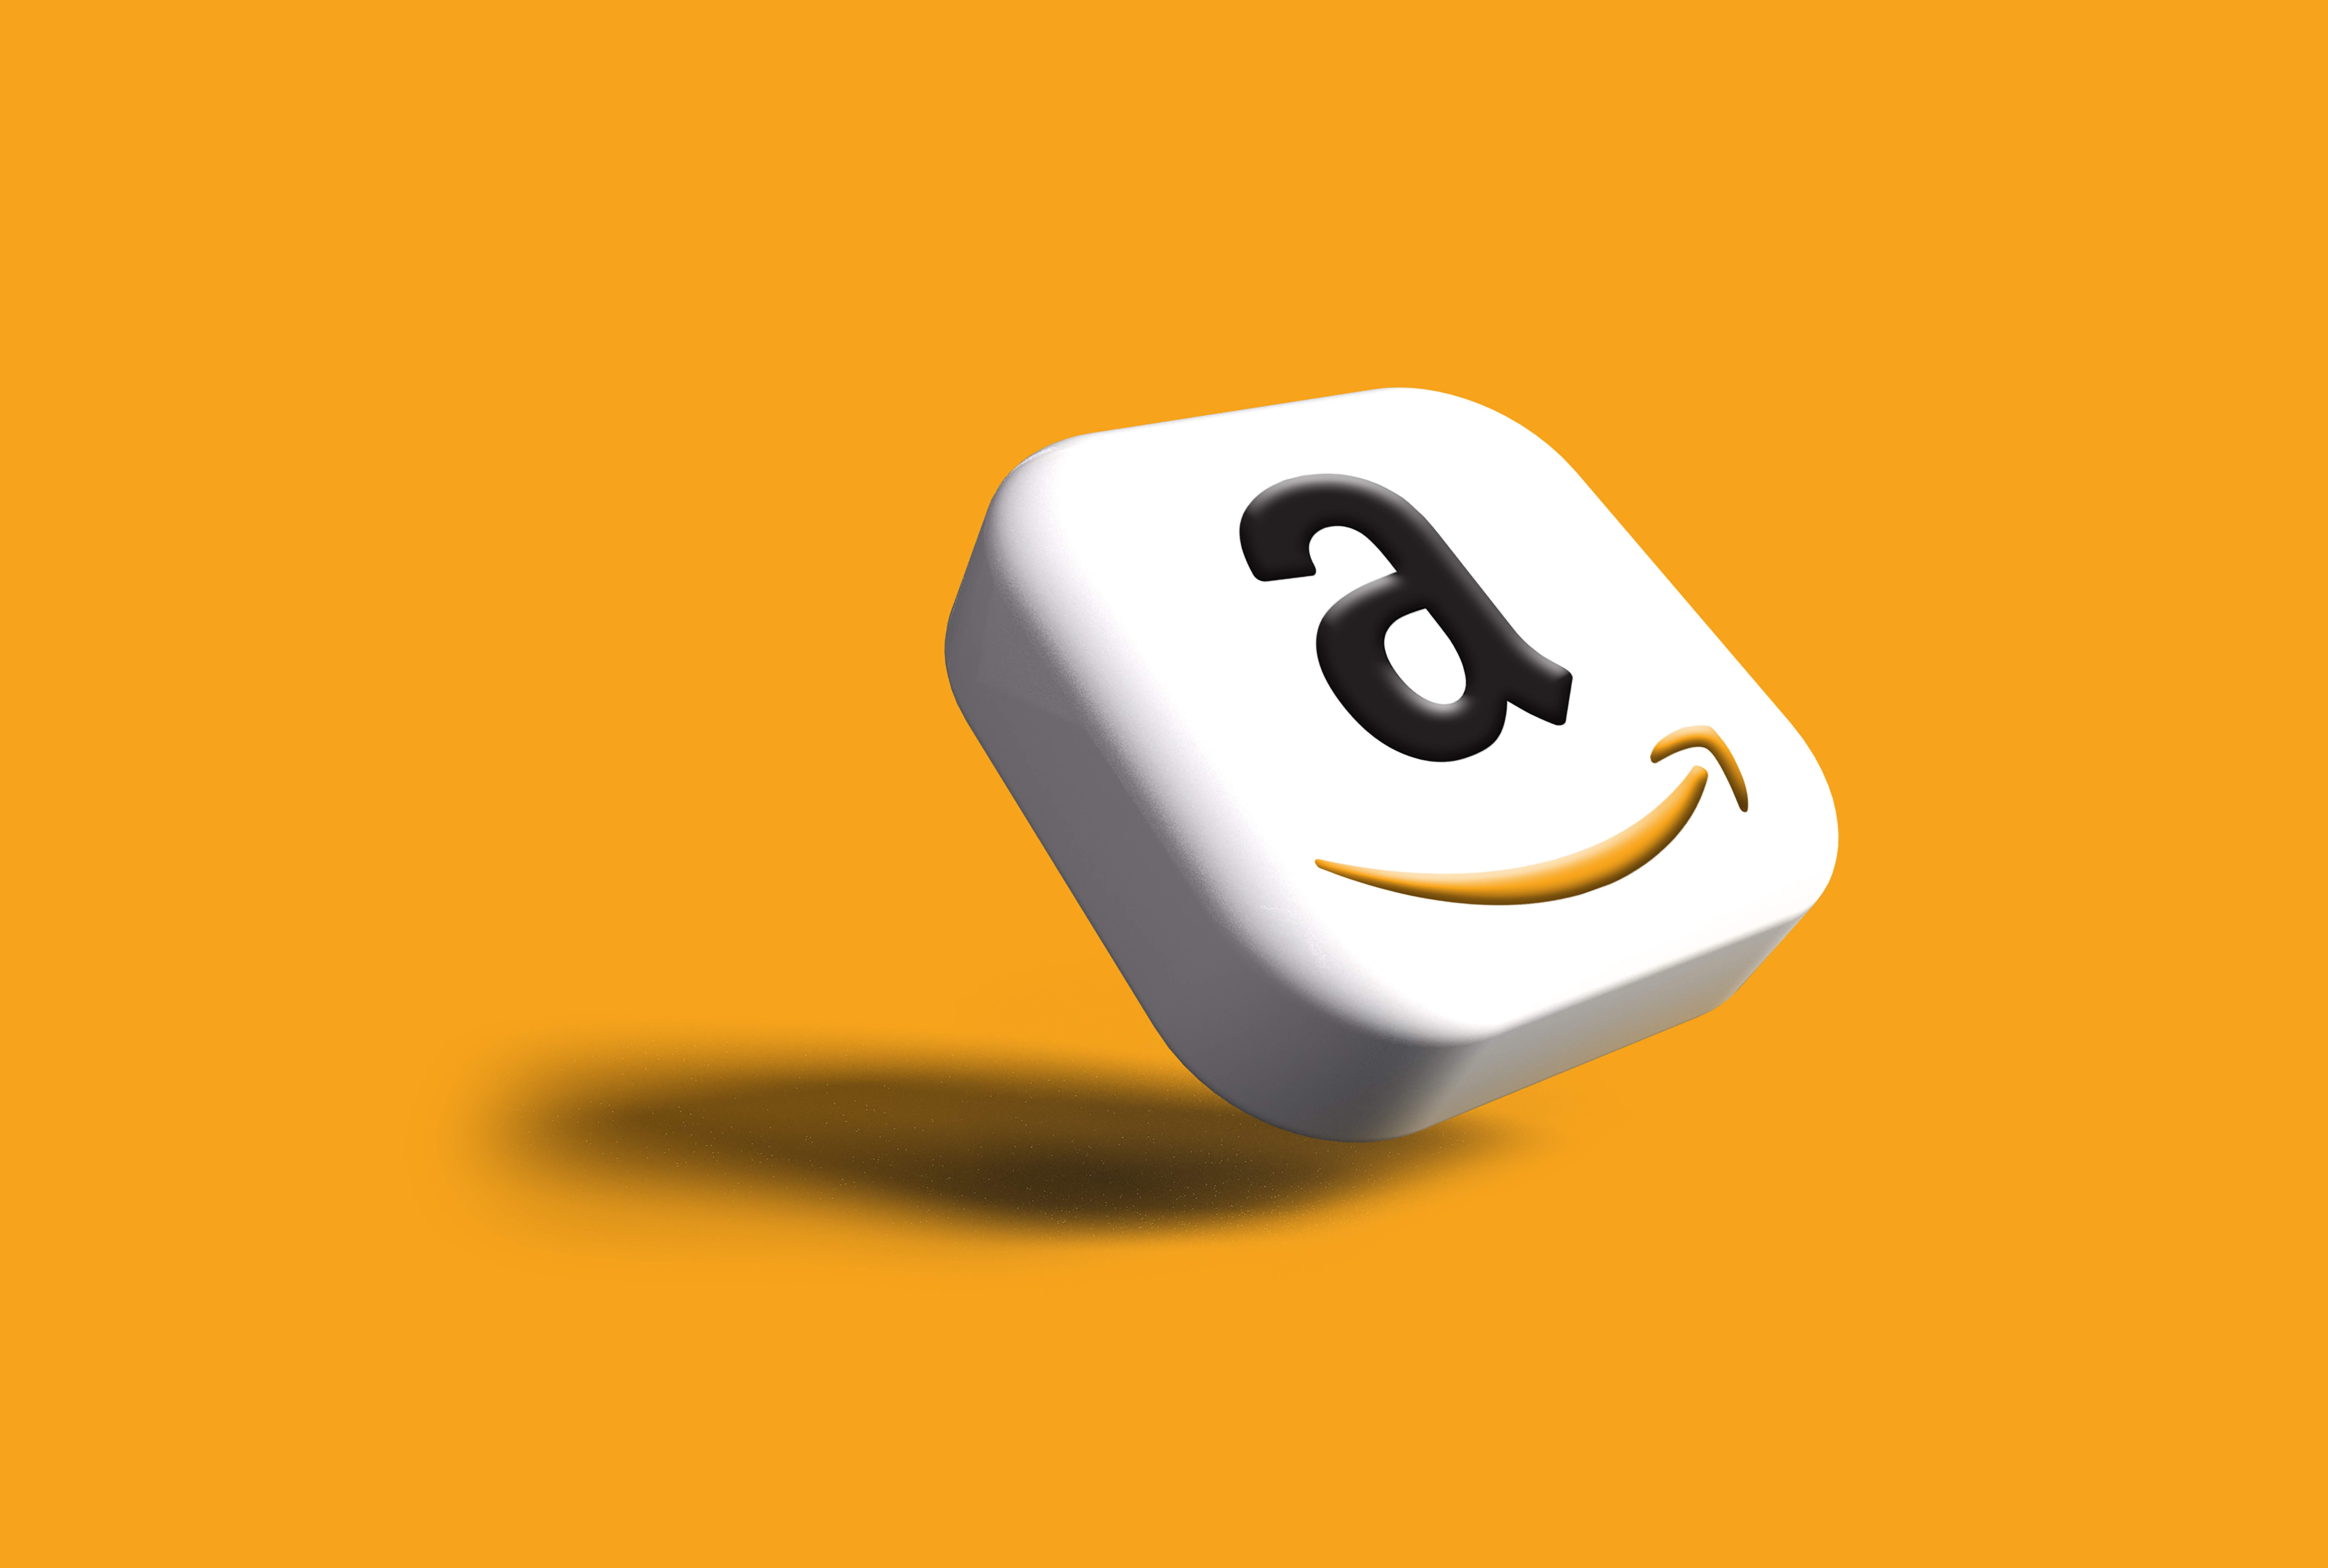 Amazon Price Tracking: How to Monitor Price Changes